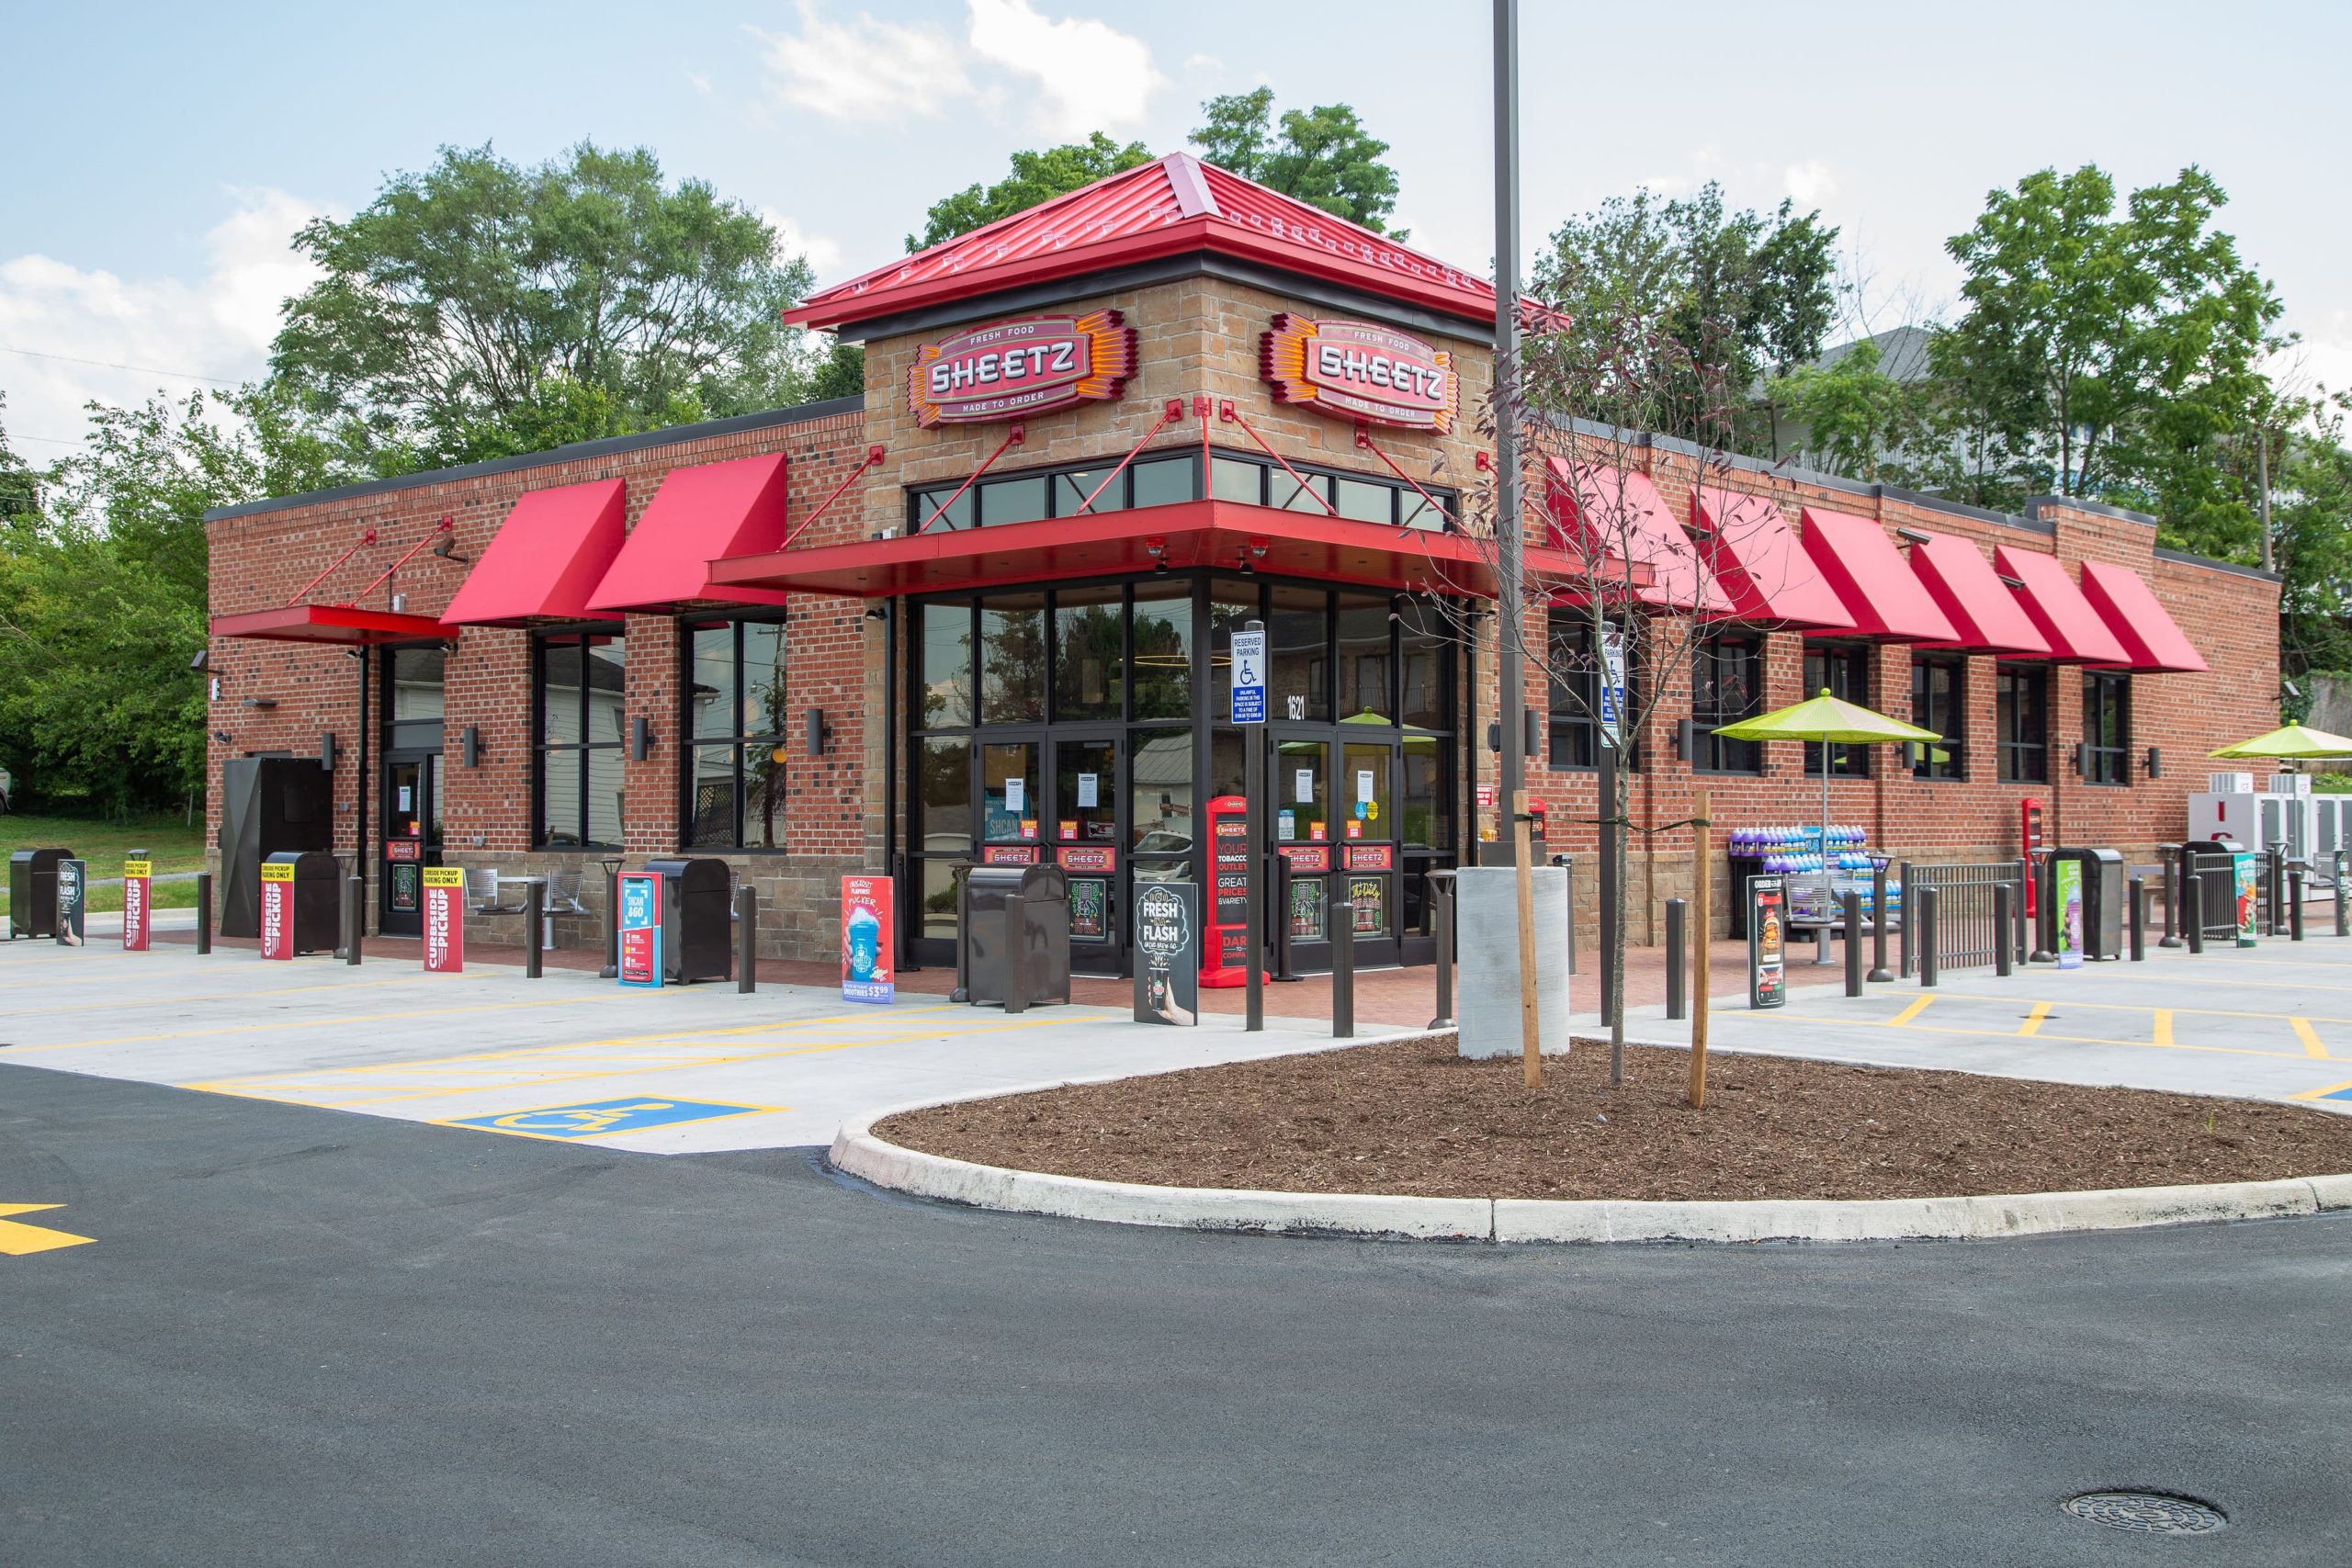 Sheetz Announces New On-Demand Delivery Option with DoorDash Partnership